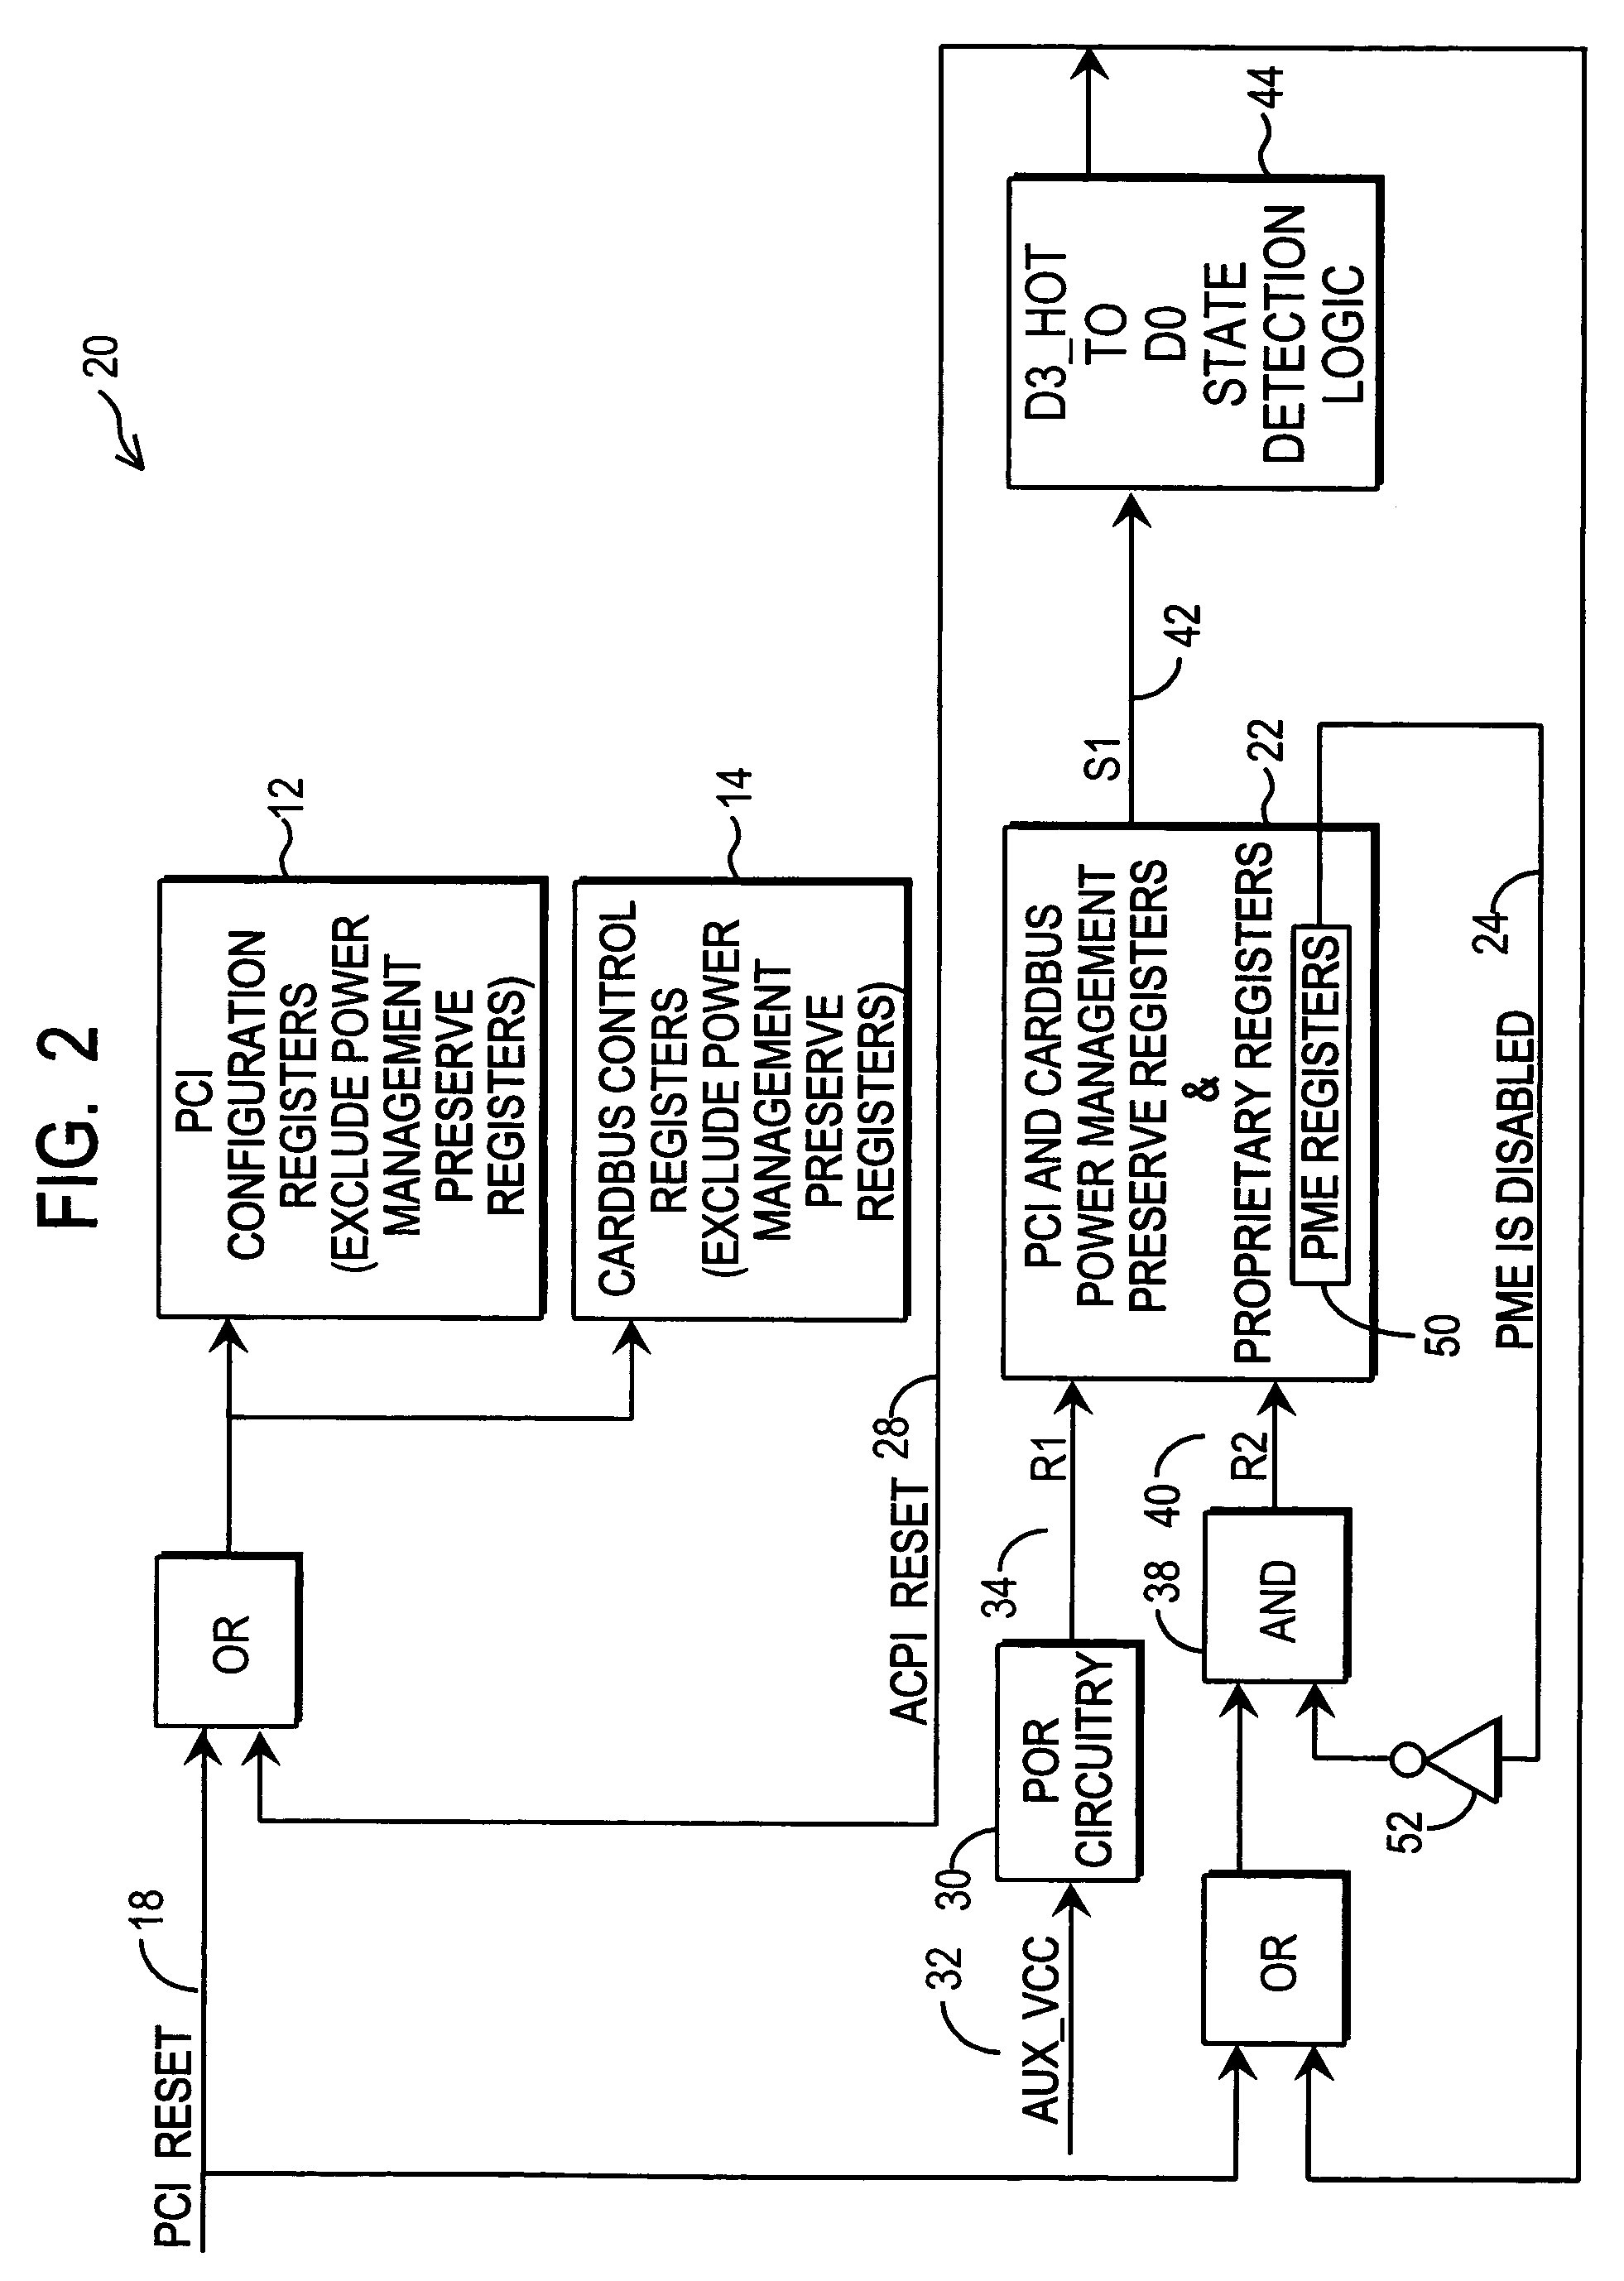 Apparatus for resetting power management enable register and resetting power management register based on an operating system instruction and output of power management enable register